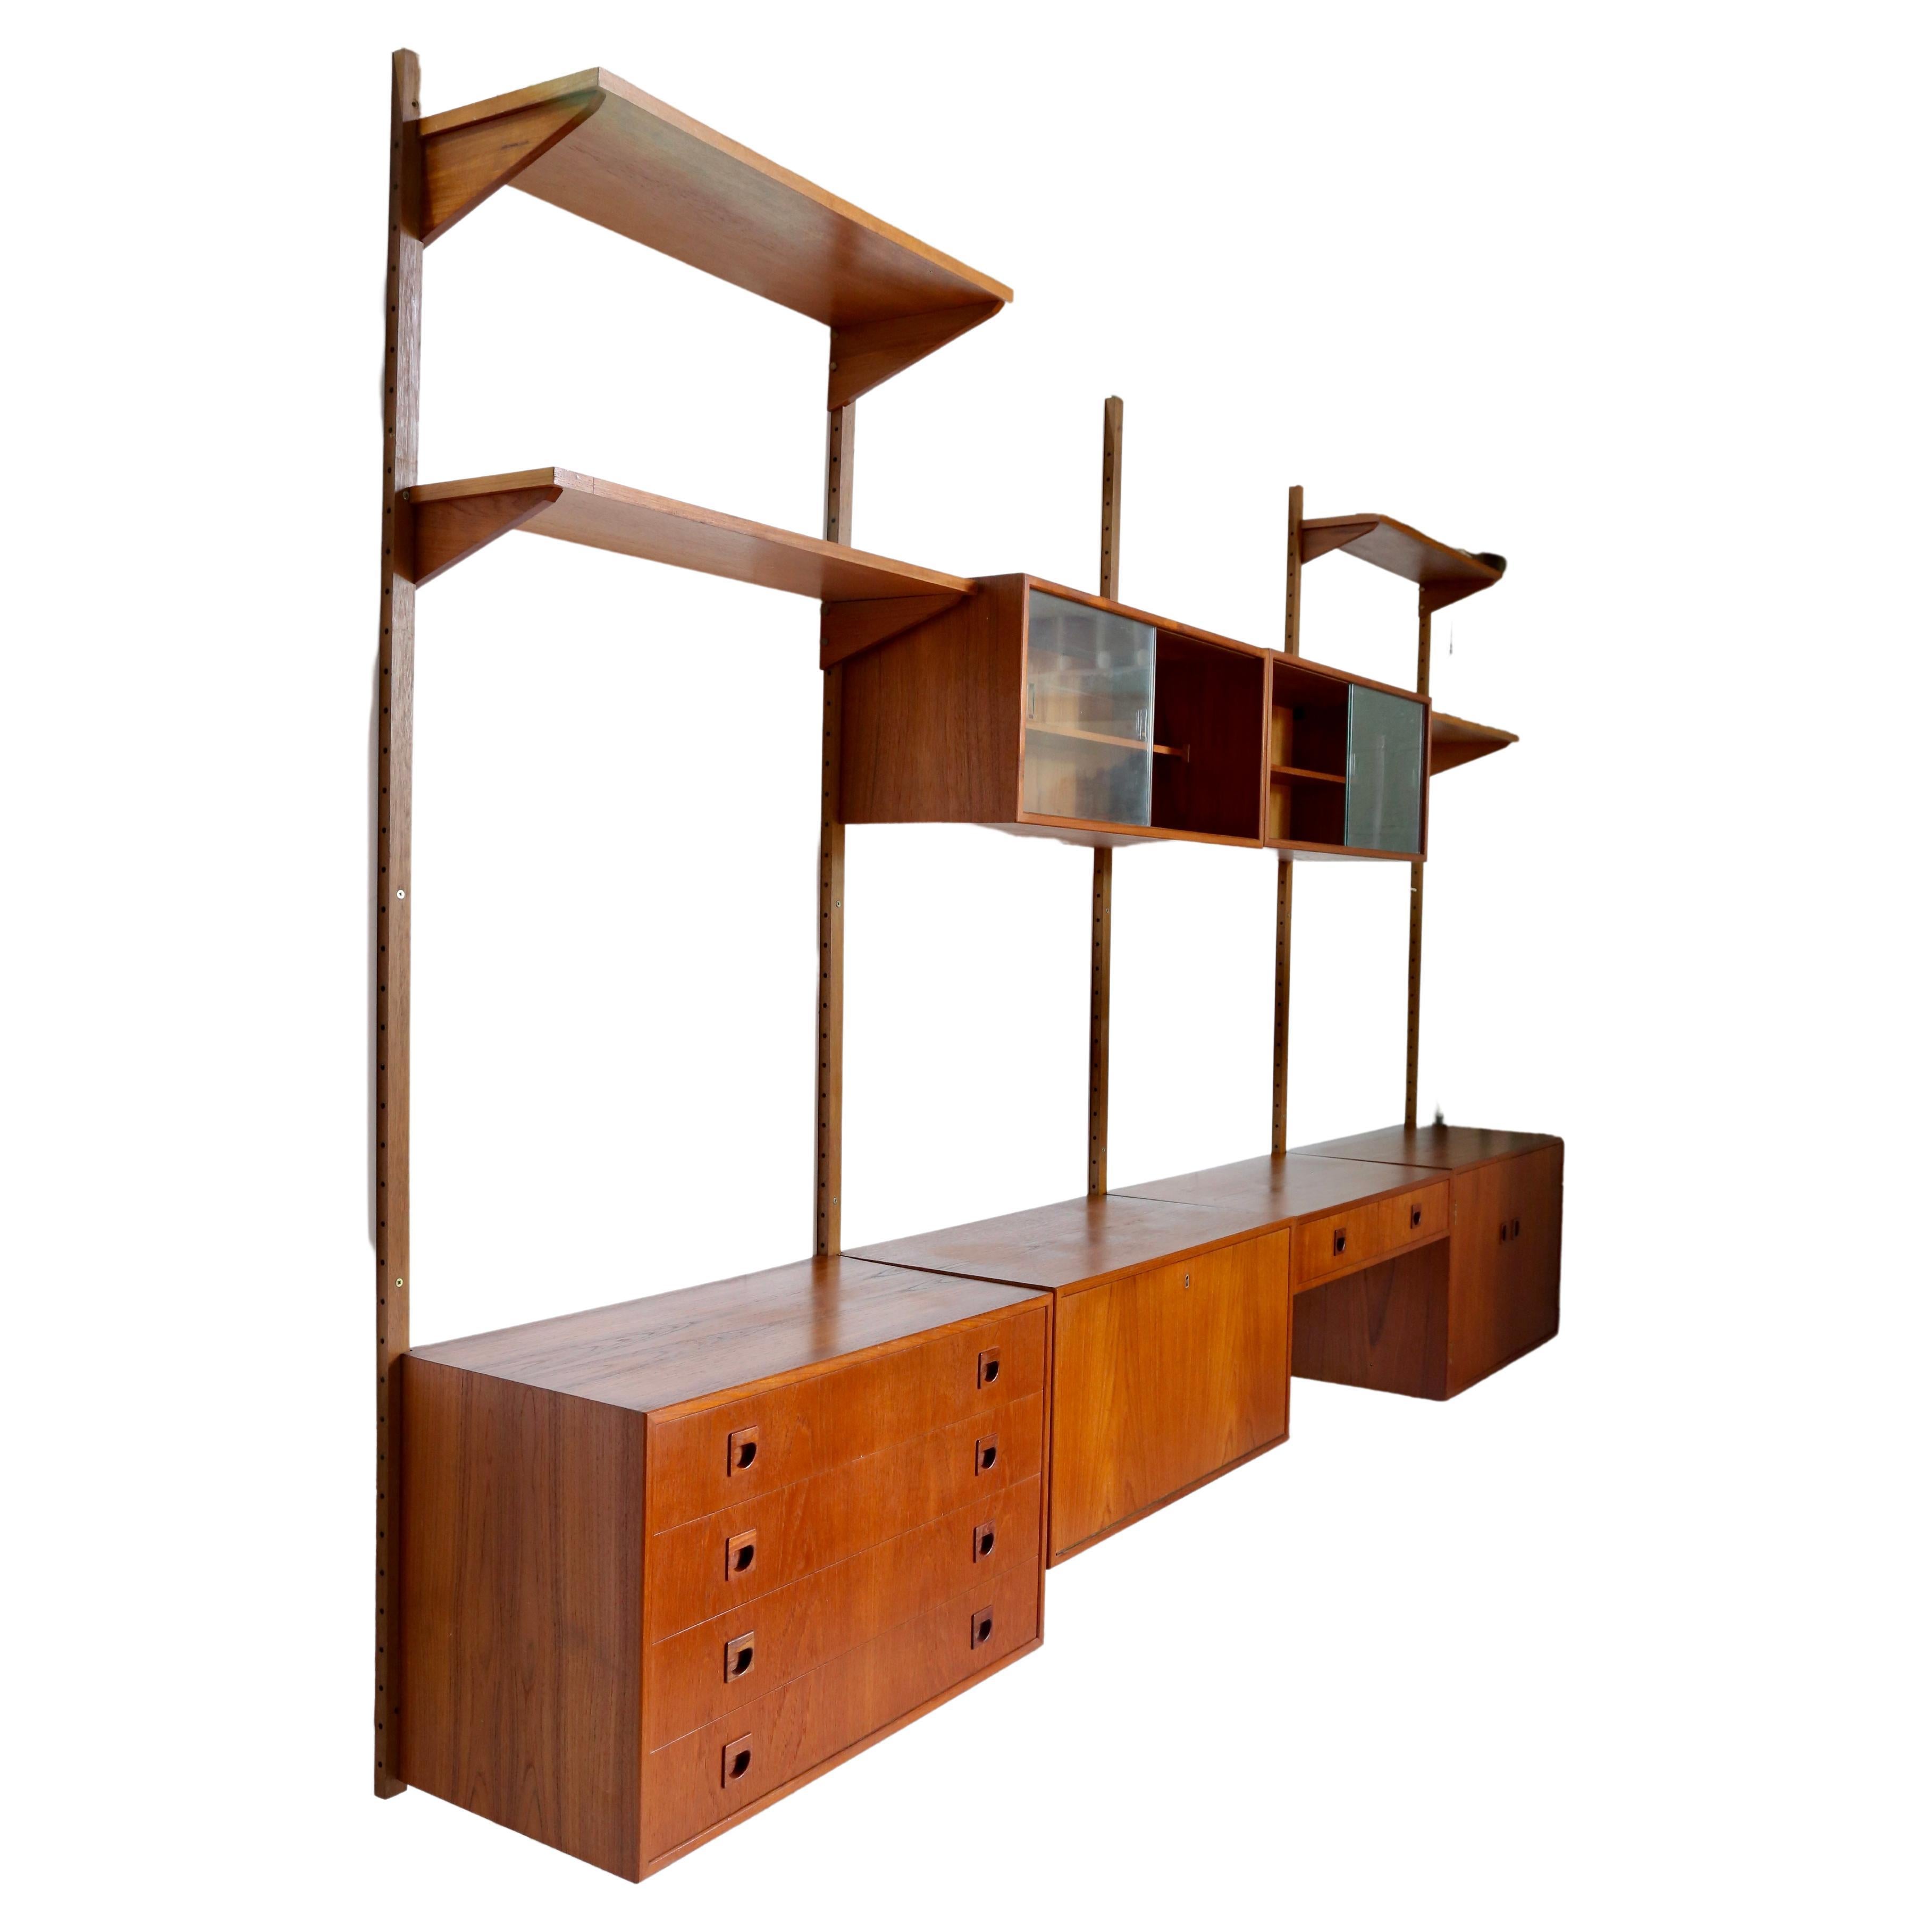 A remarkable and functional Danish Mid Century Modern wall unit, designed by Rud Thygesen and Johnny Sorensen for HG Furniture (Hansen and Guldborg) Denmark, 1960s. The complete modular unit comes with five wall-mounted uprights, six cabinets, one